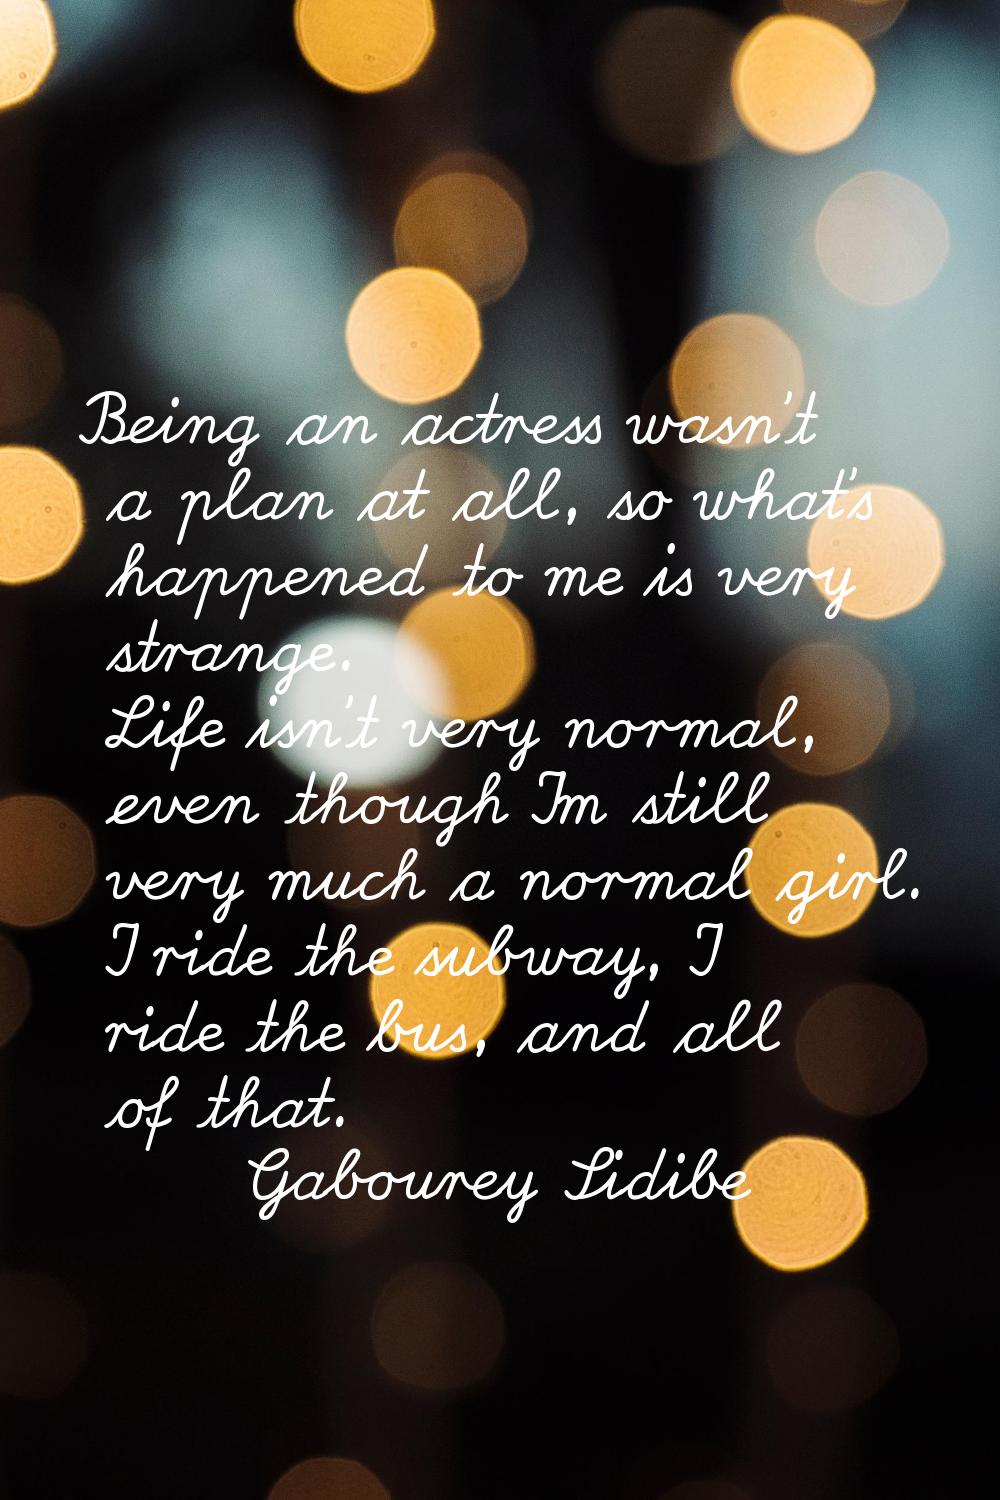 Being an actress wasn't a plan at all, so what's happened to me is very strange. Life isn't very no